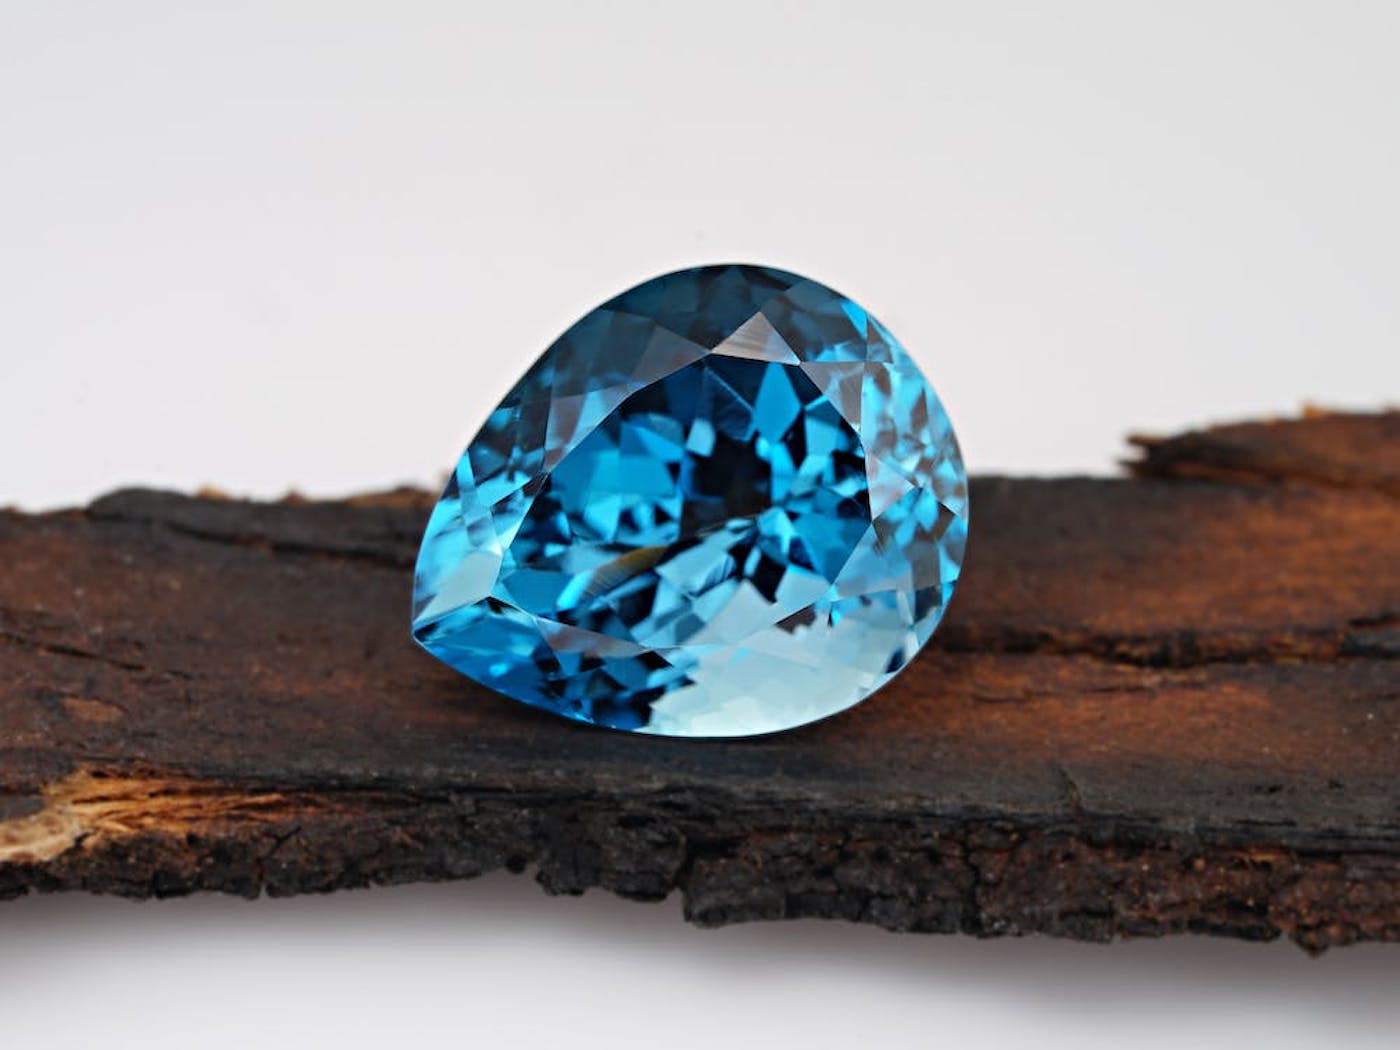 The Benefits of Buying Loose Gemstones Instead of Set Jewelry